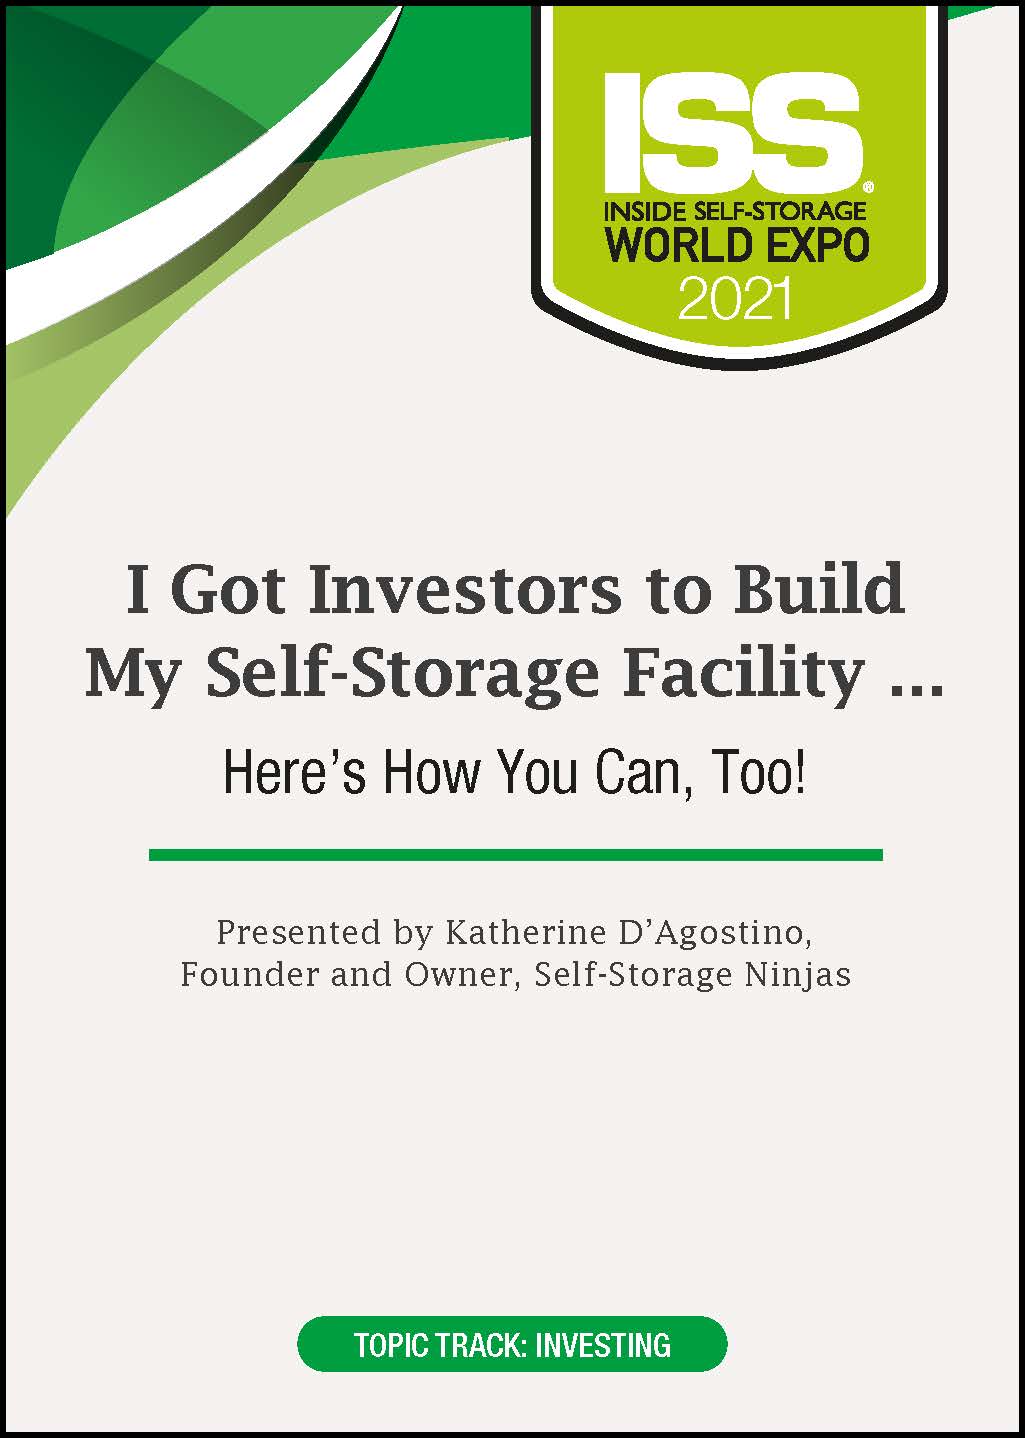 I Got Investors to Build My Self-Storage Facility … Here’s How You Can, Too!